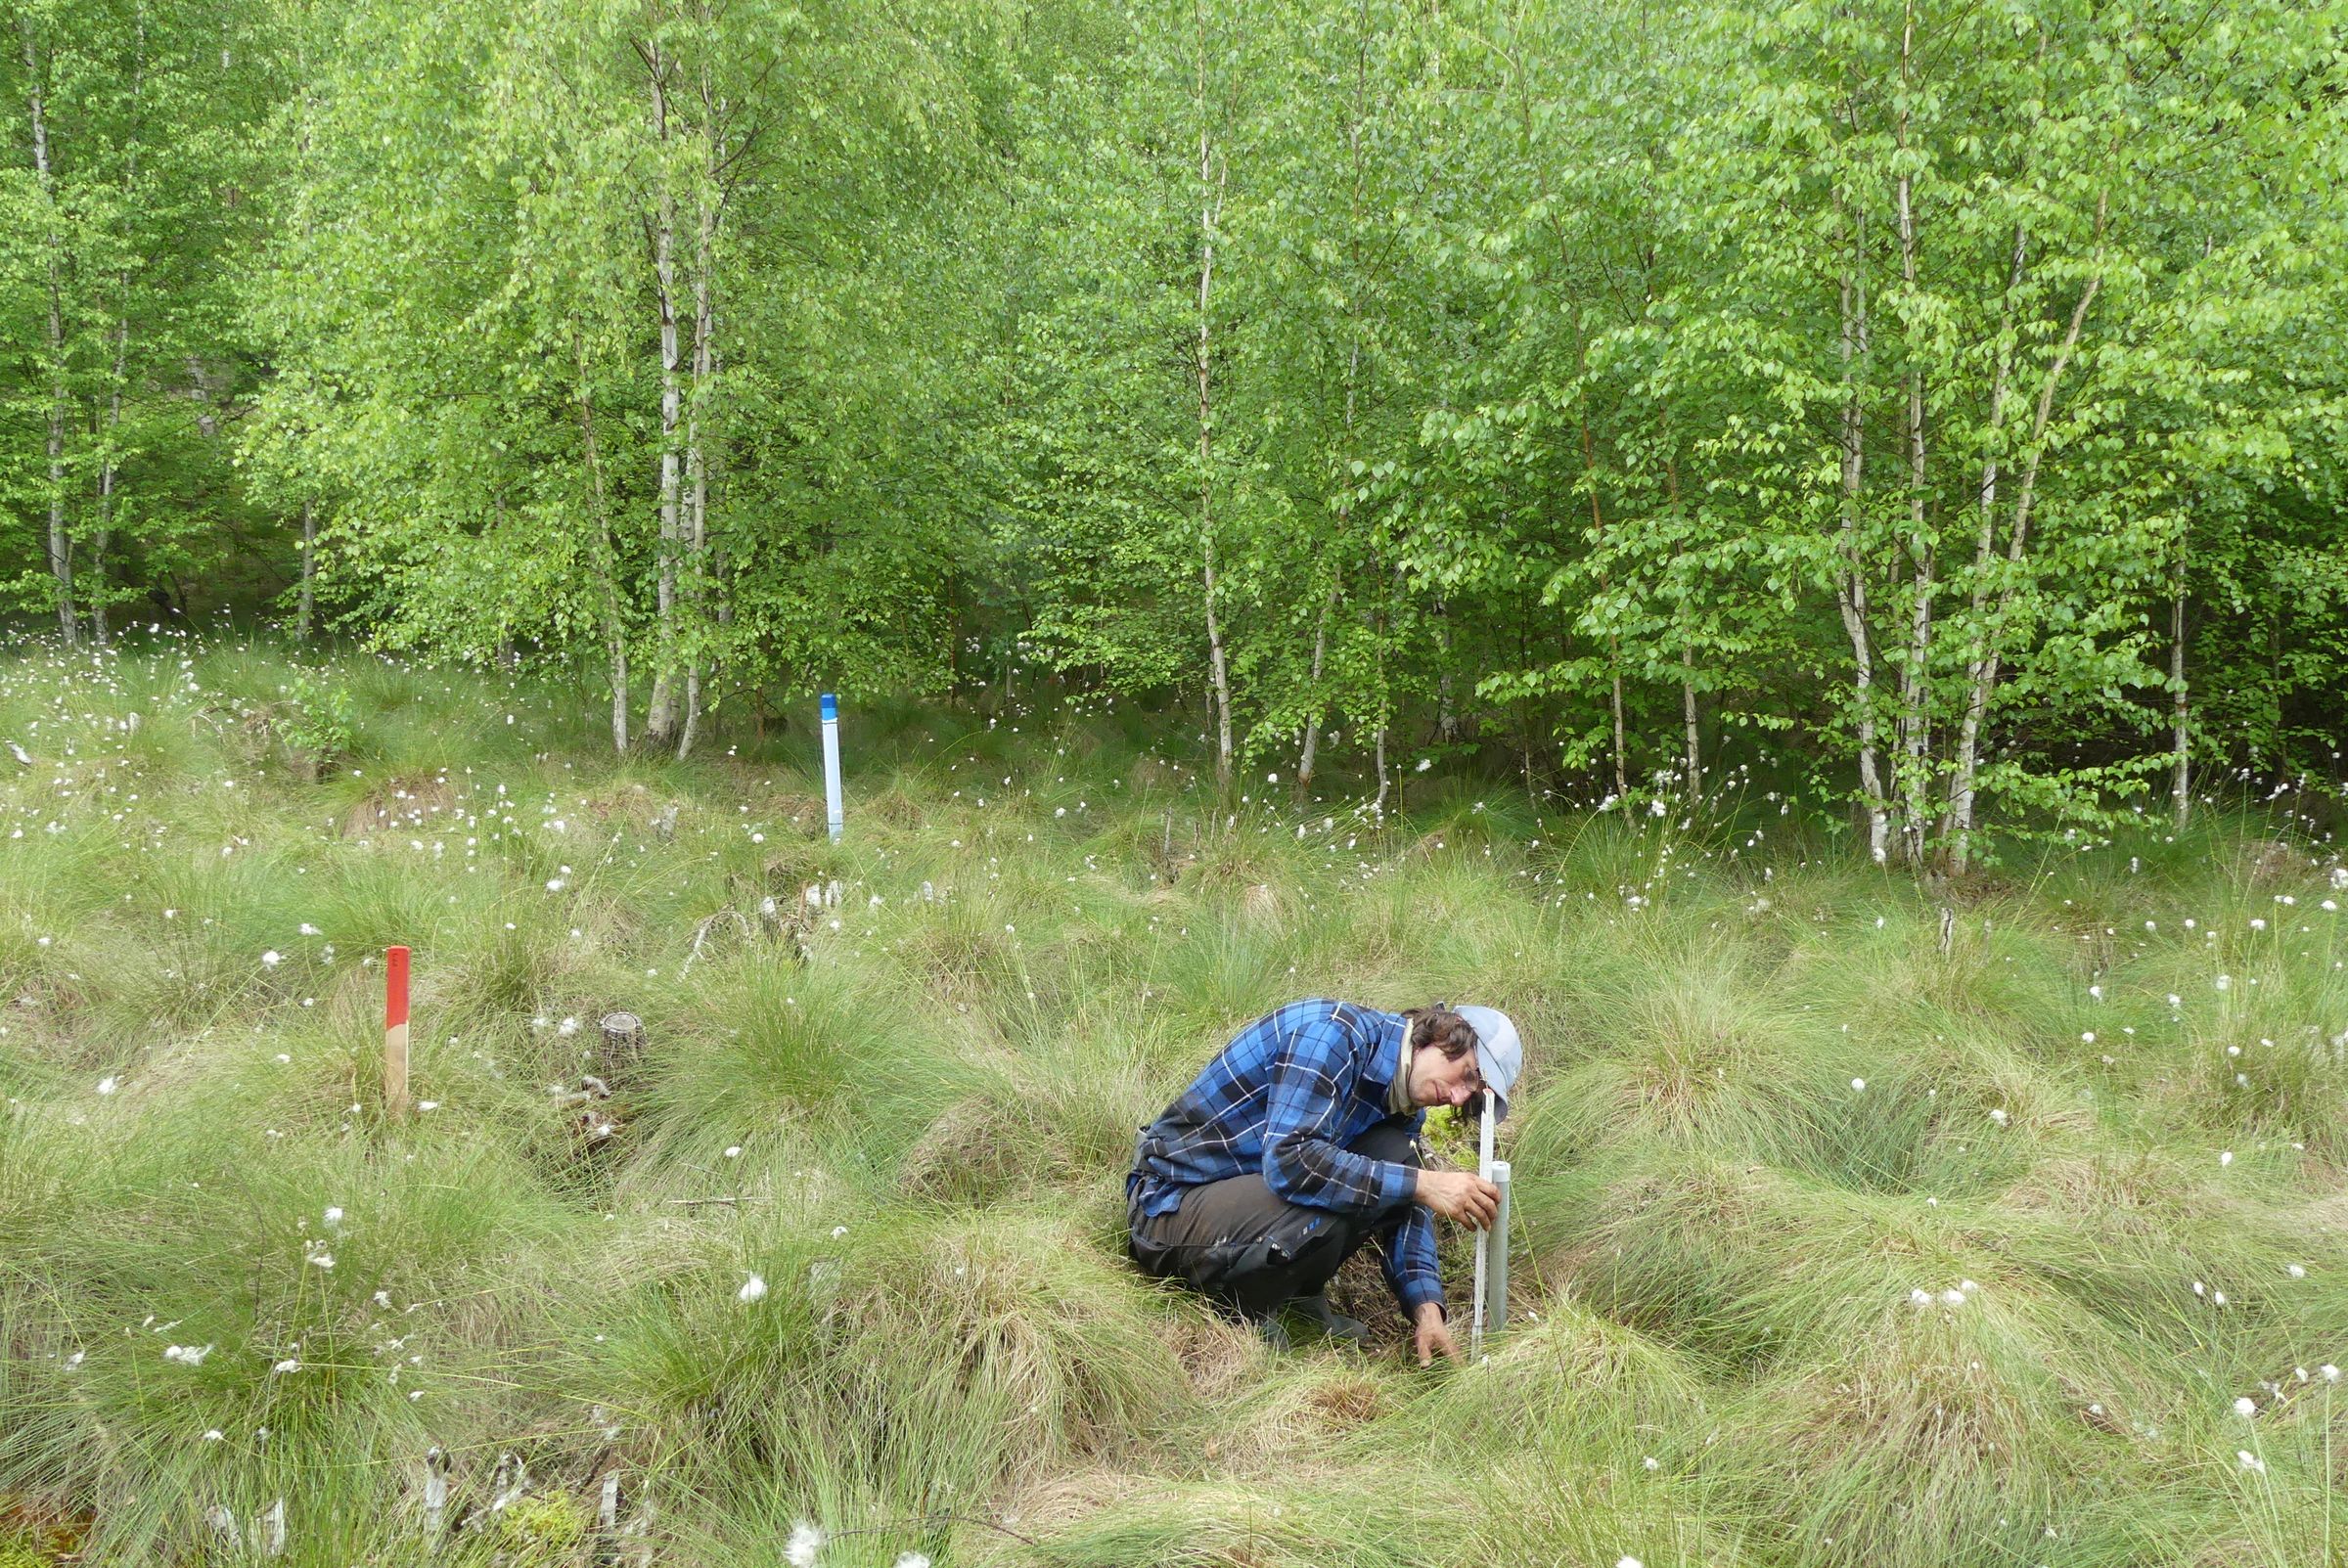 [Translate to English:] Measuring of the emerging part of a pole to determine changes in the peat surface elevation, which in future should serve to assess peat subsidence. Stromtrassenmoor near Spechthausen in Brandenburg.